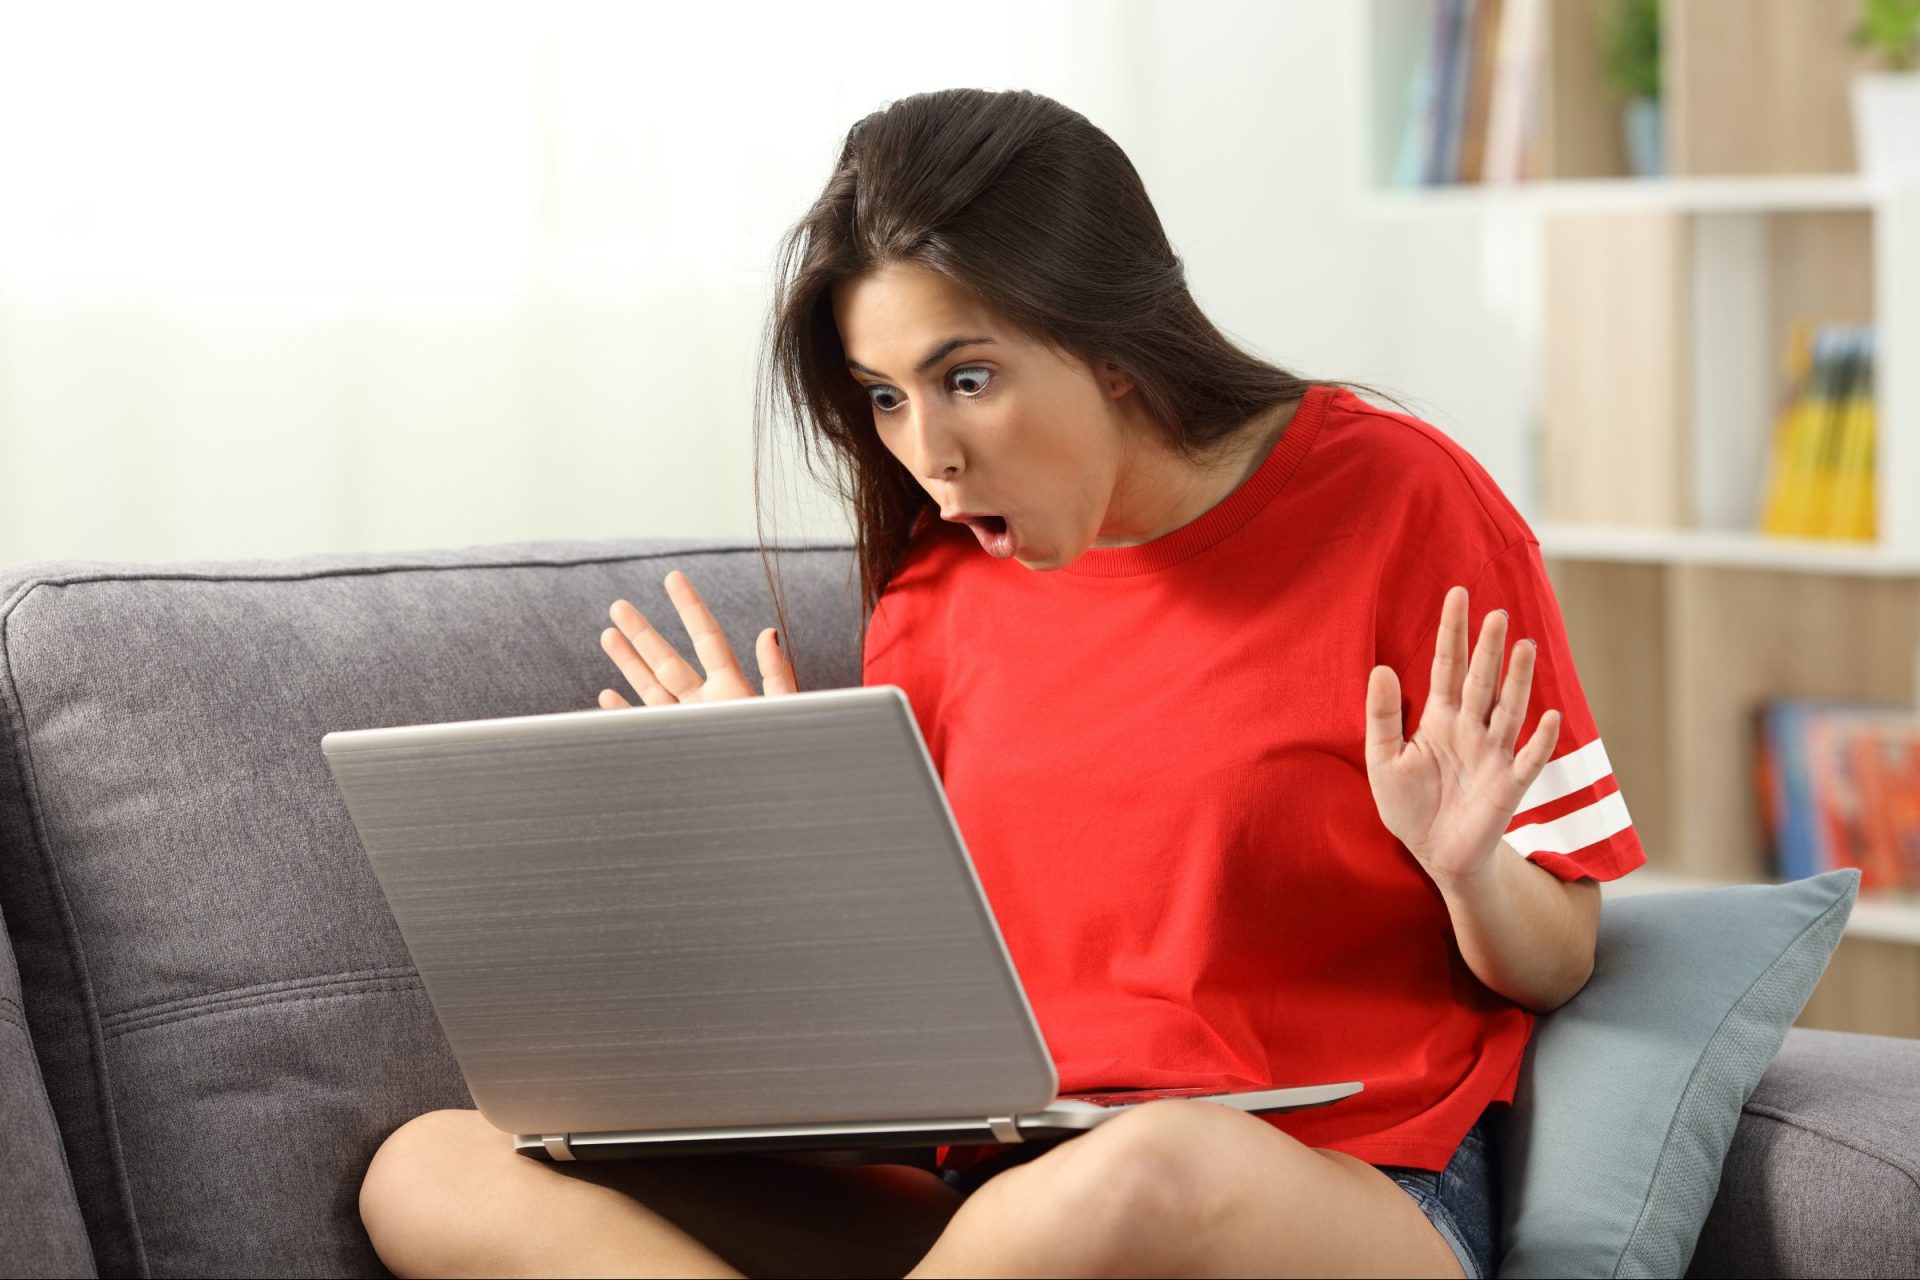 Surprised young woman looking at laptop